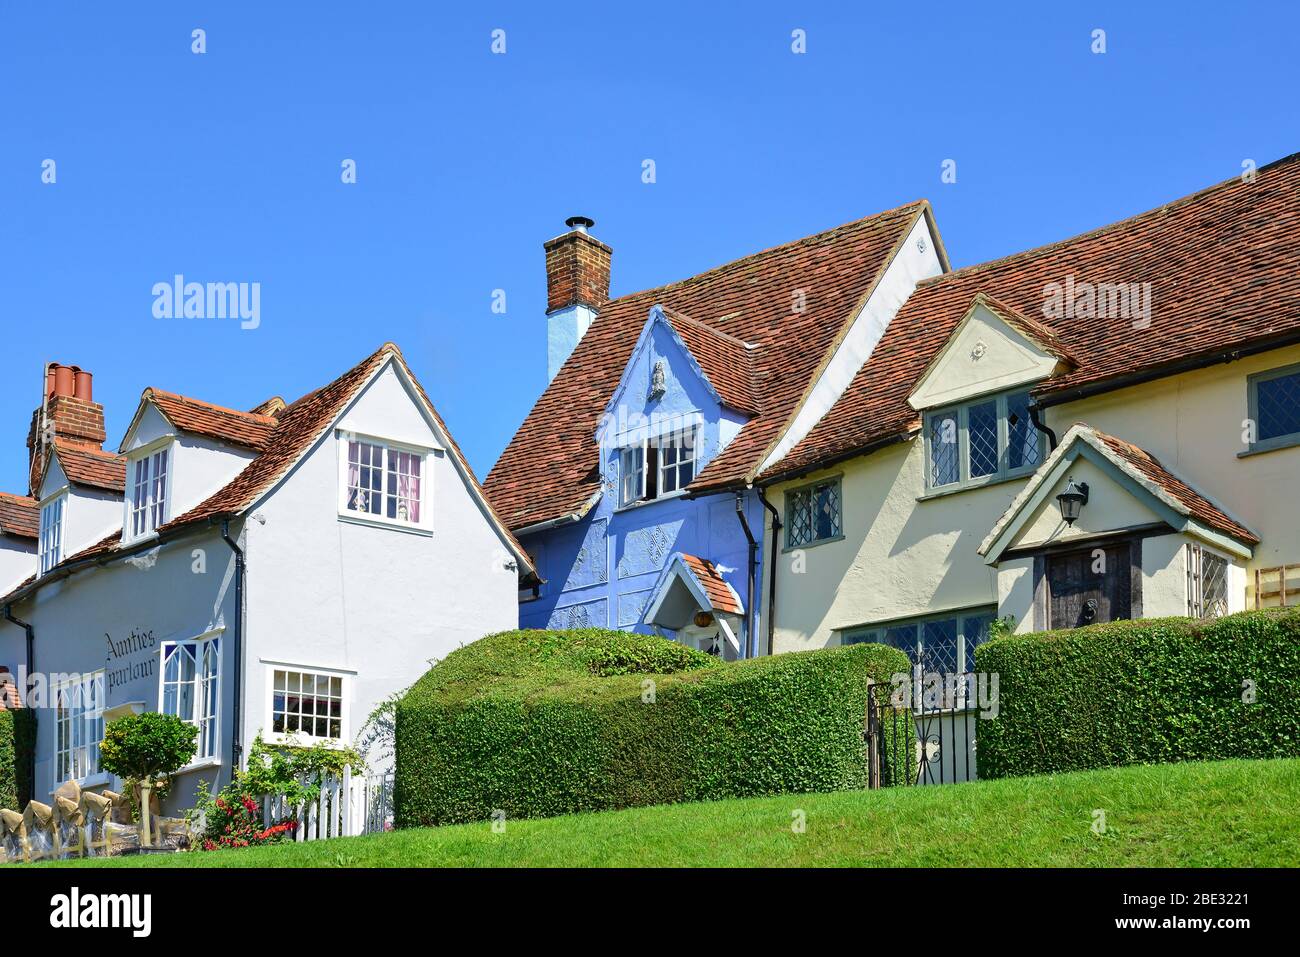 Period cottages in Finchingfield, Essex, England, United Kingdom Stock Photo